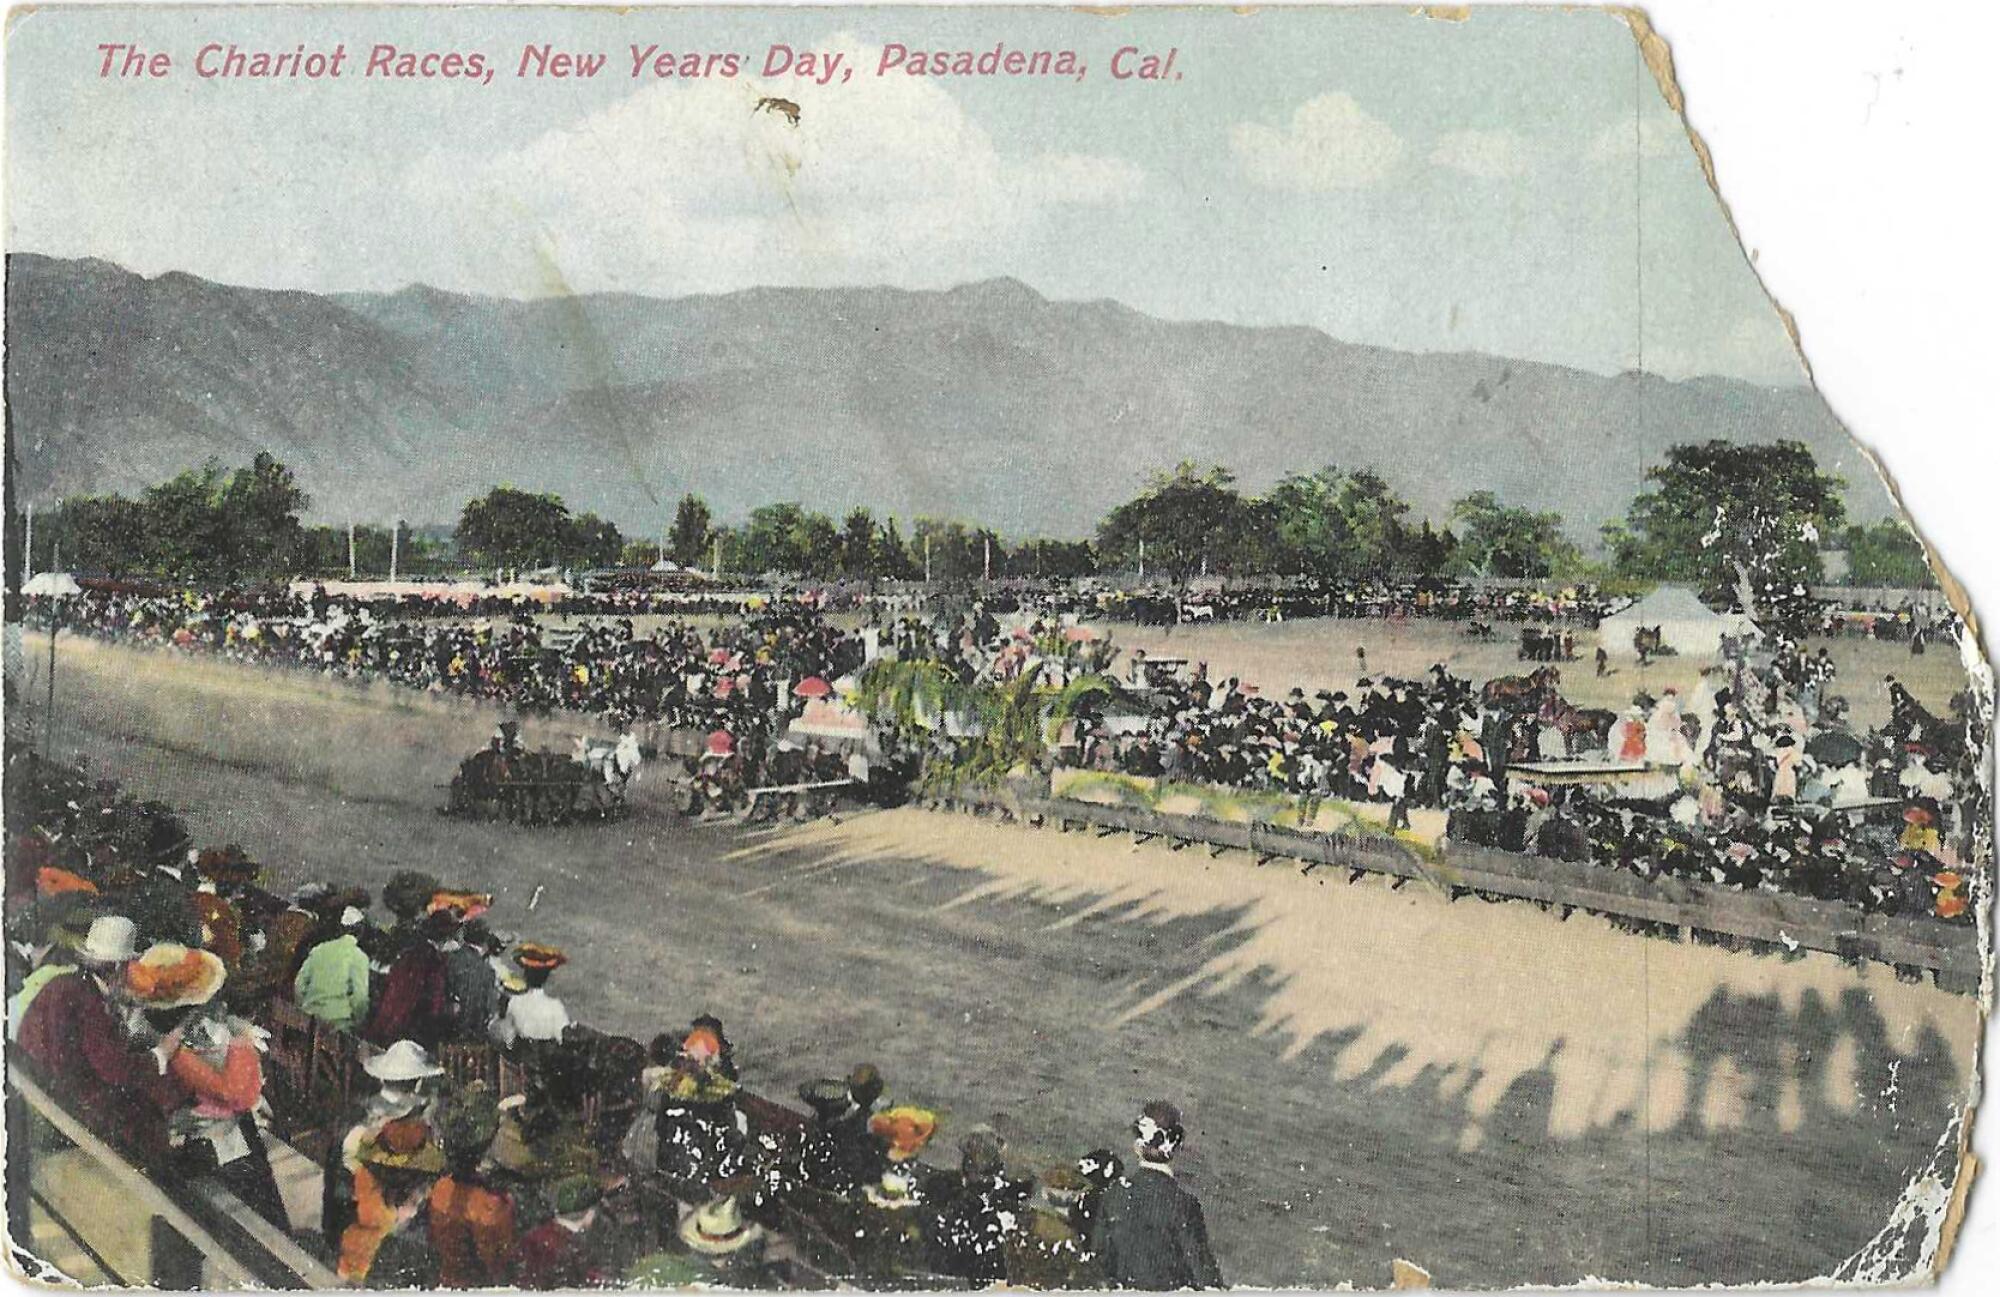 A vintage postcard with a large section missing from the top right corner depicts a Tournament of Roses chariot race.